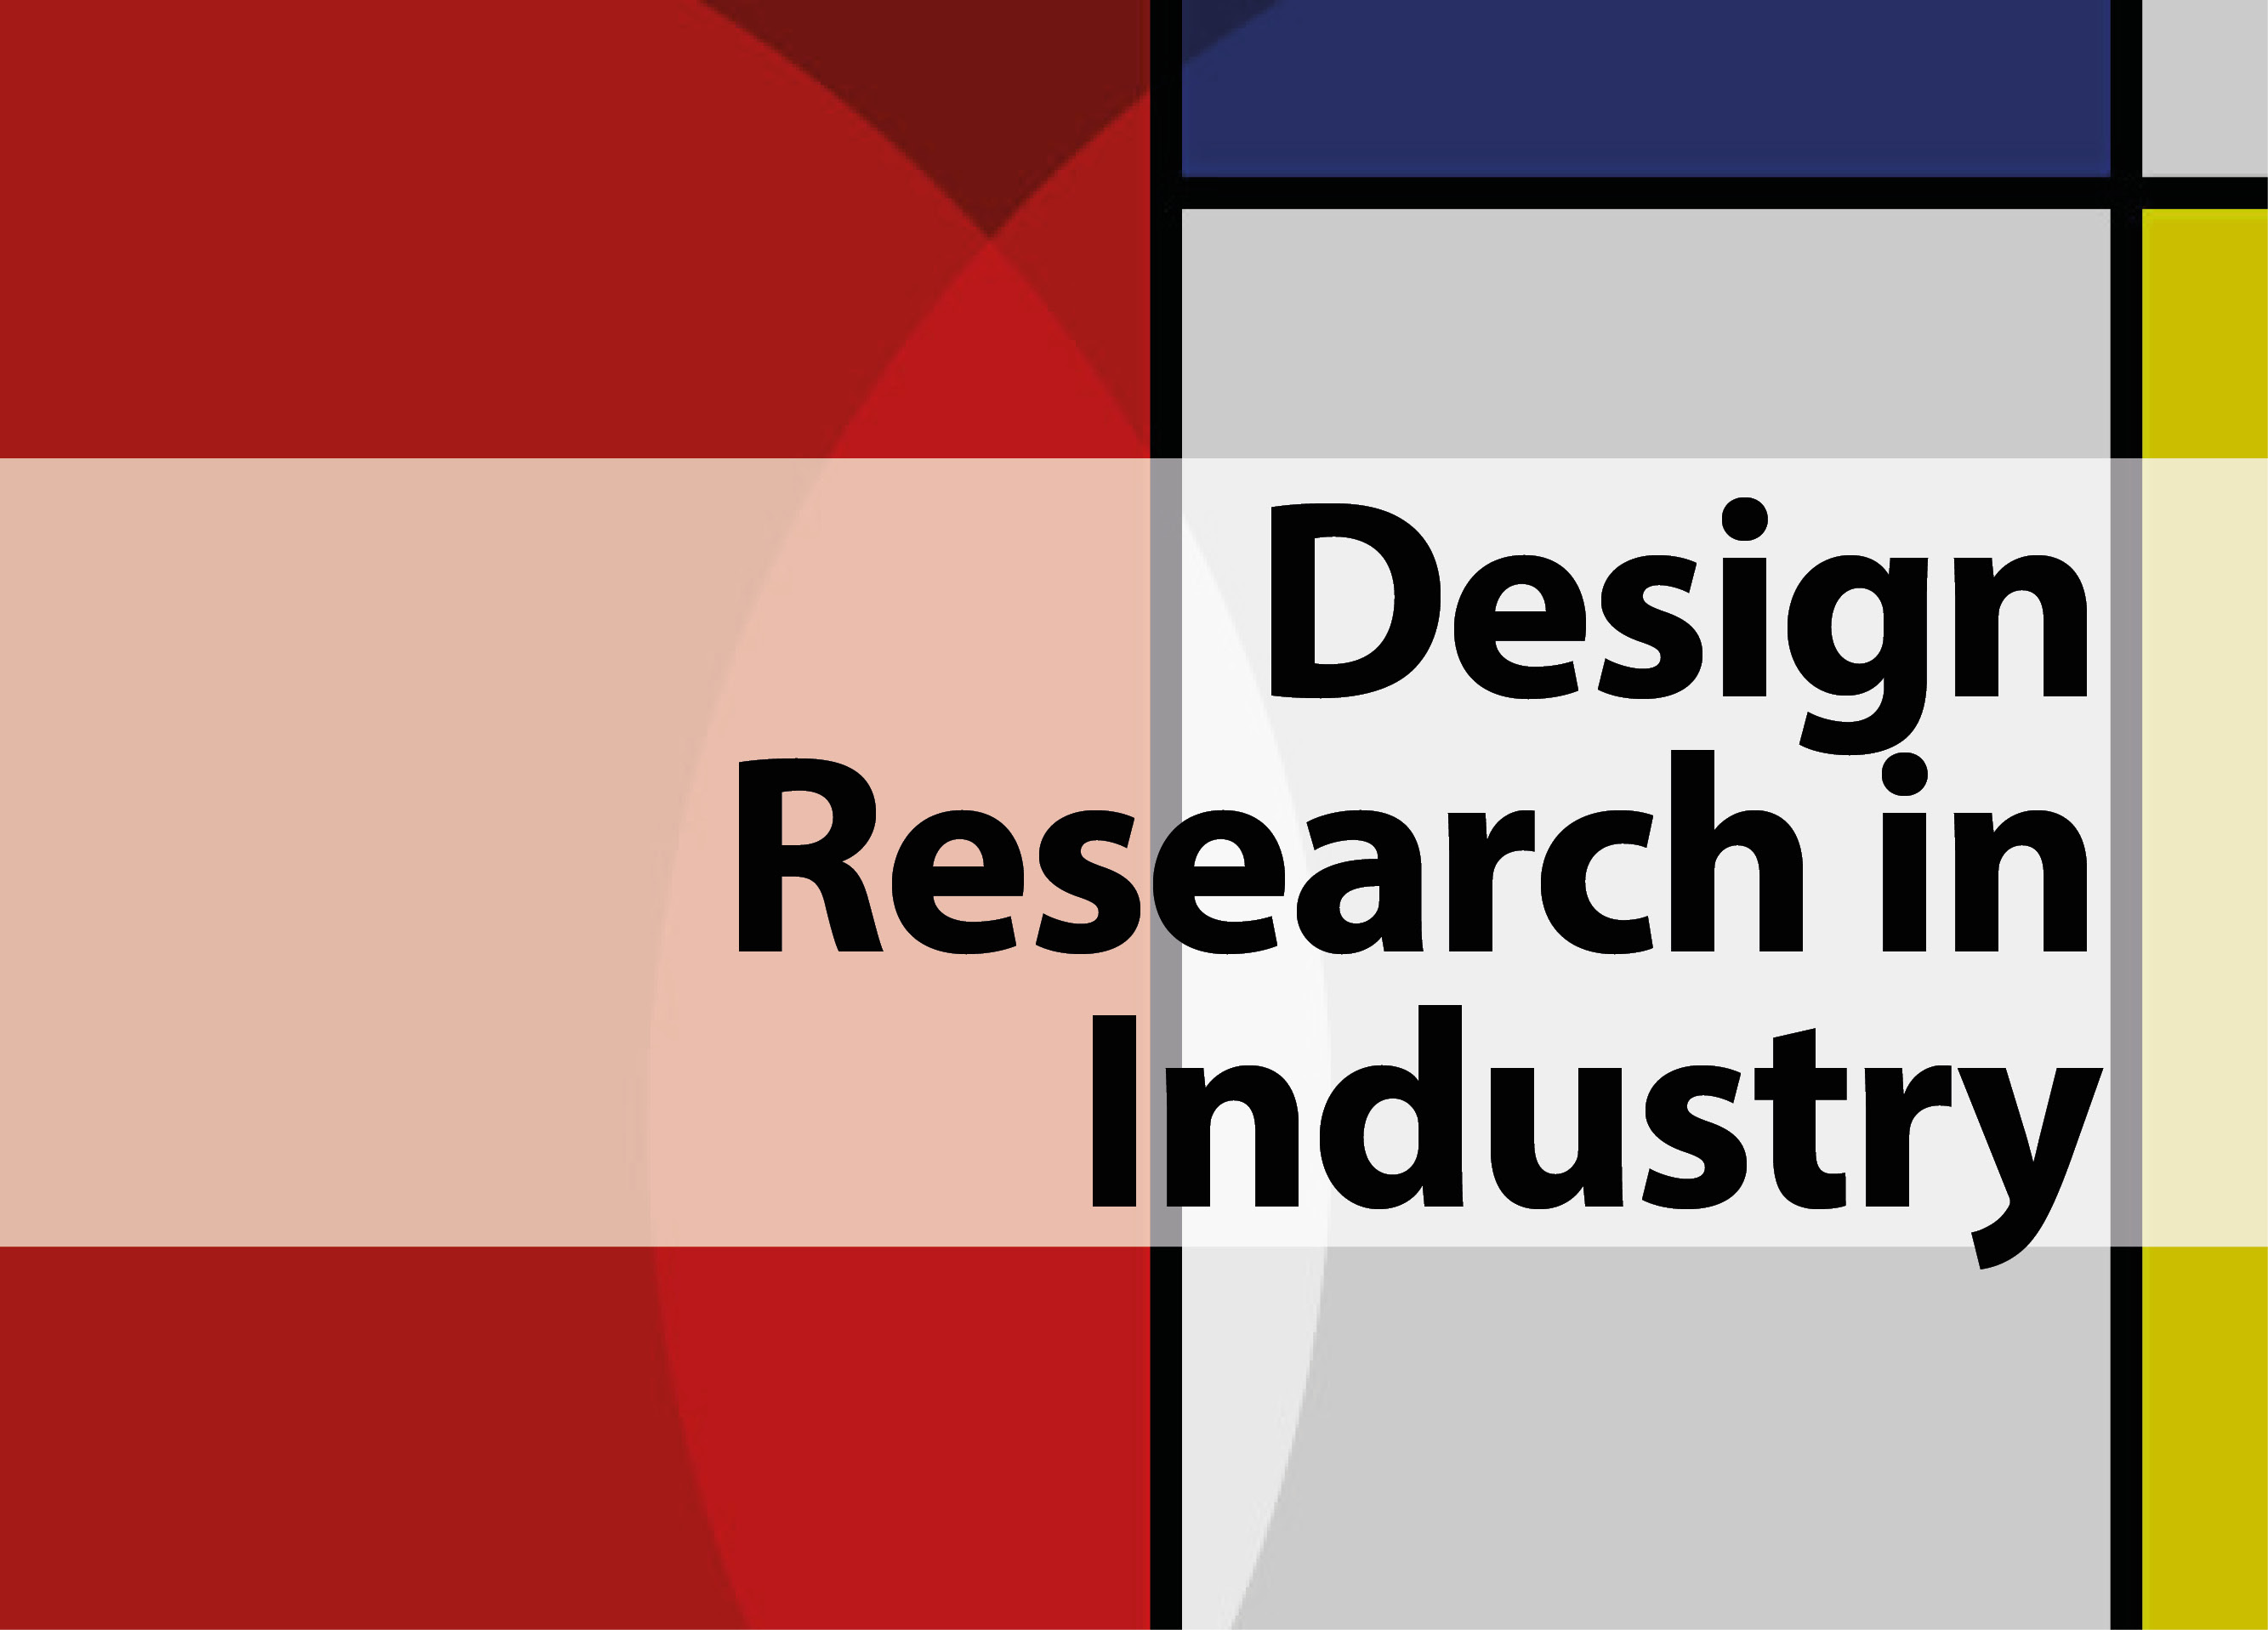 Design Research in Industry